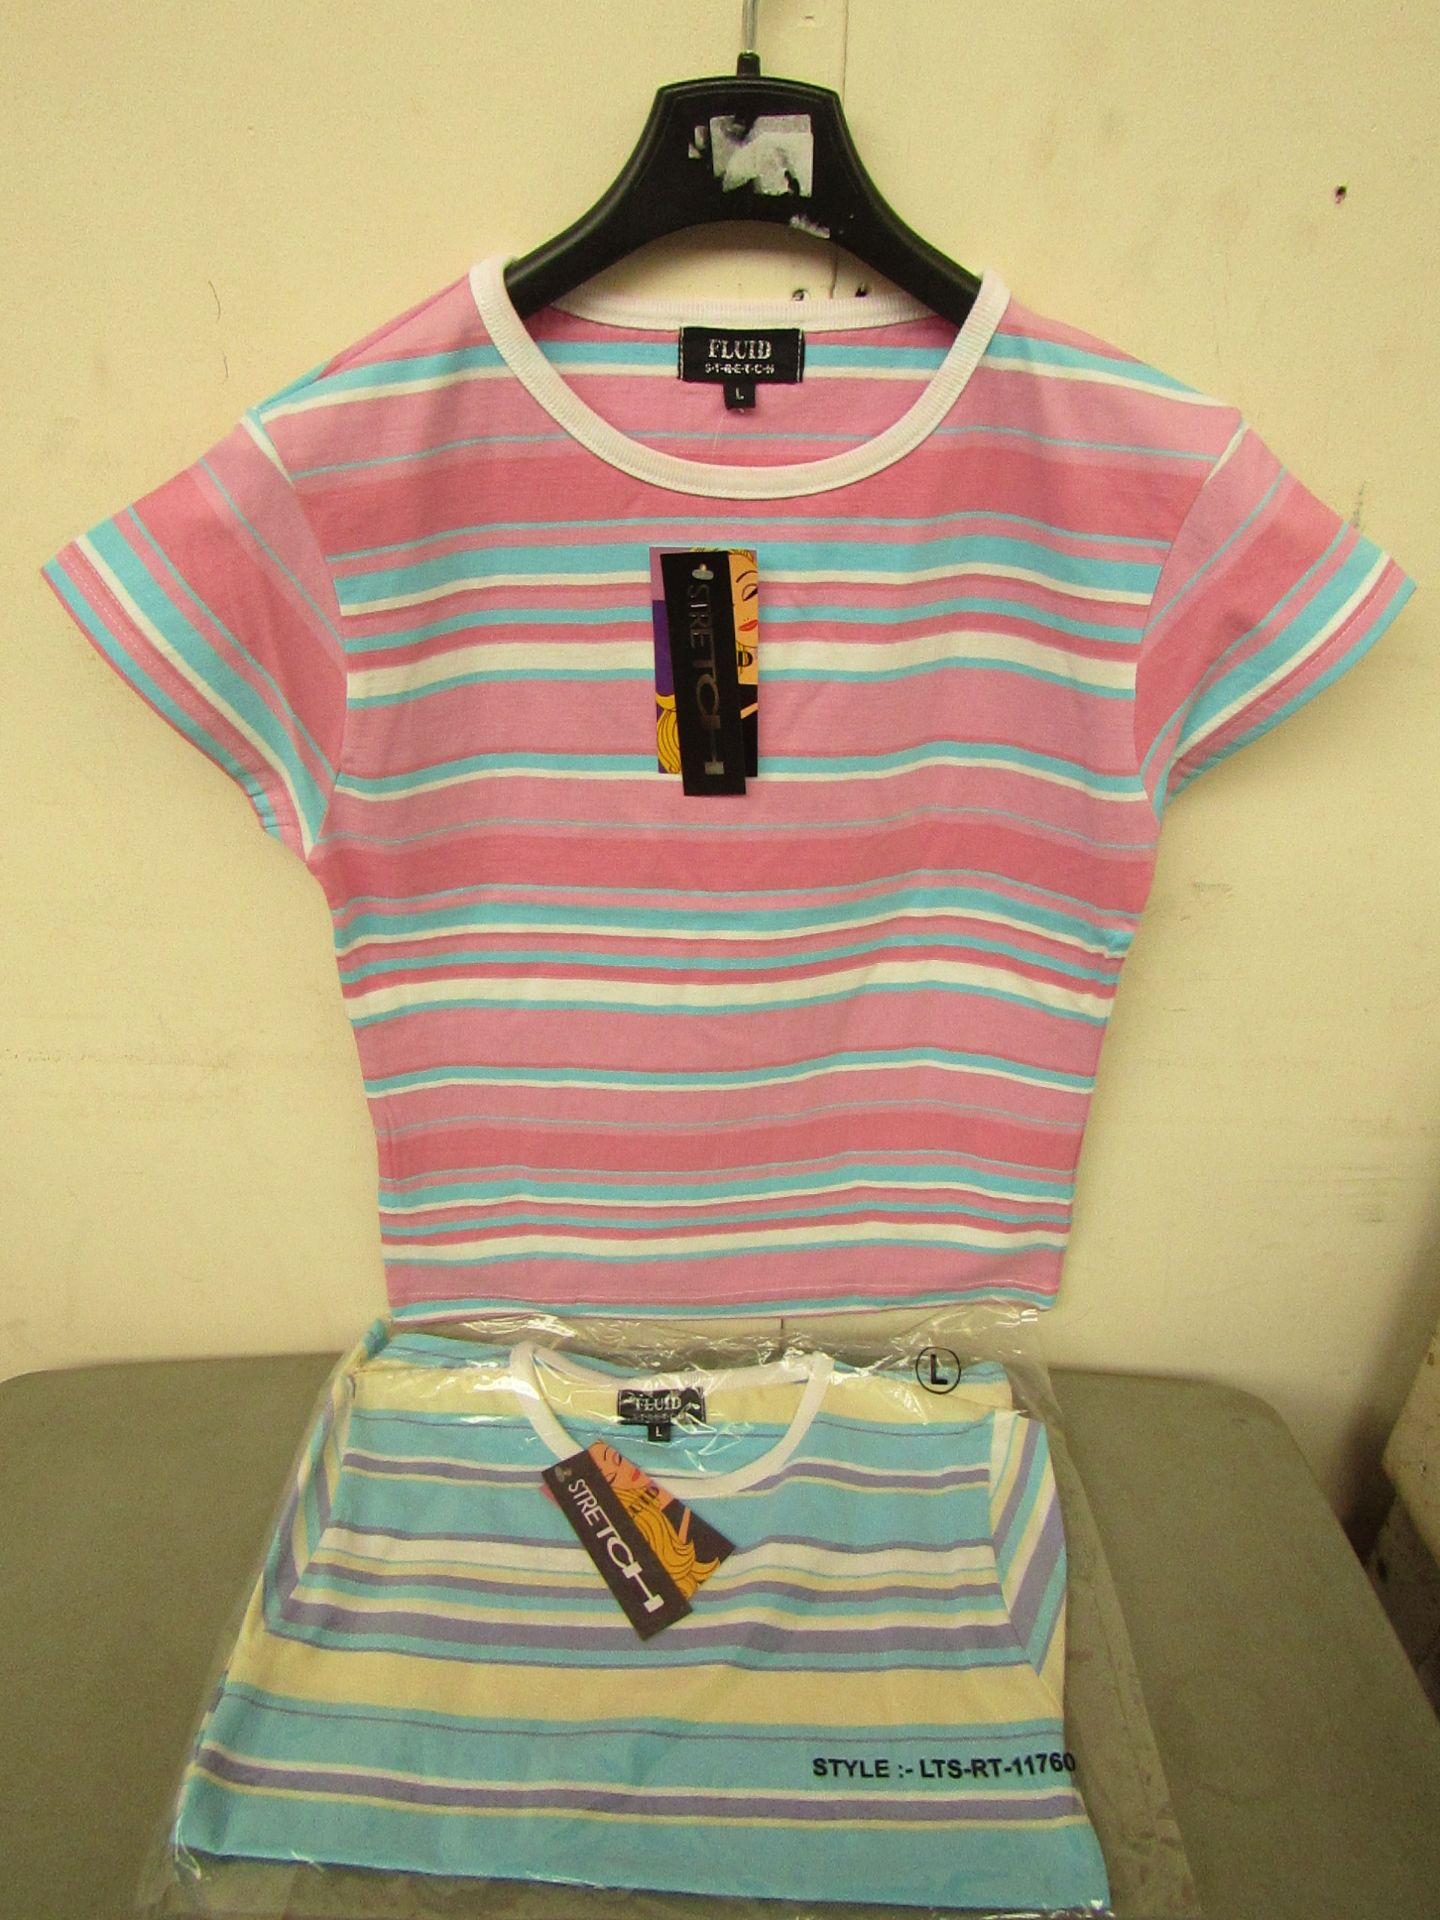 46 X Ladies stretch t/shirts,sizes range from Sml - Large,multi-colour stripe,all new in packaging